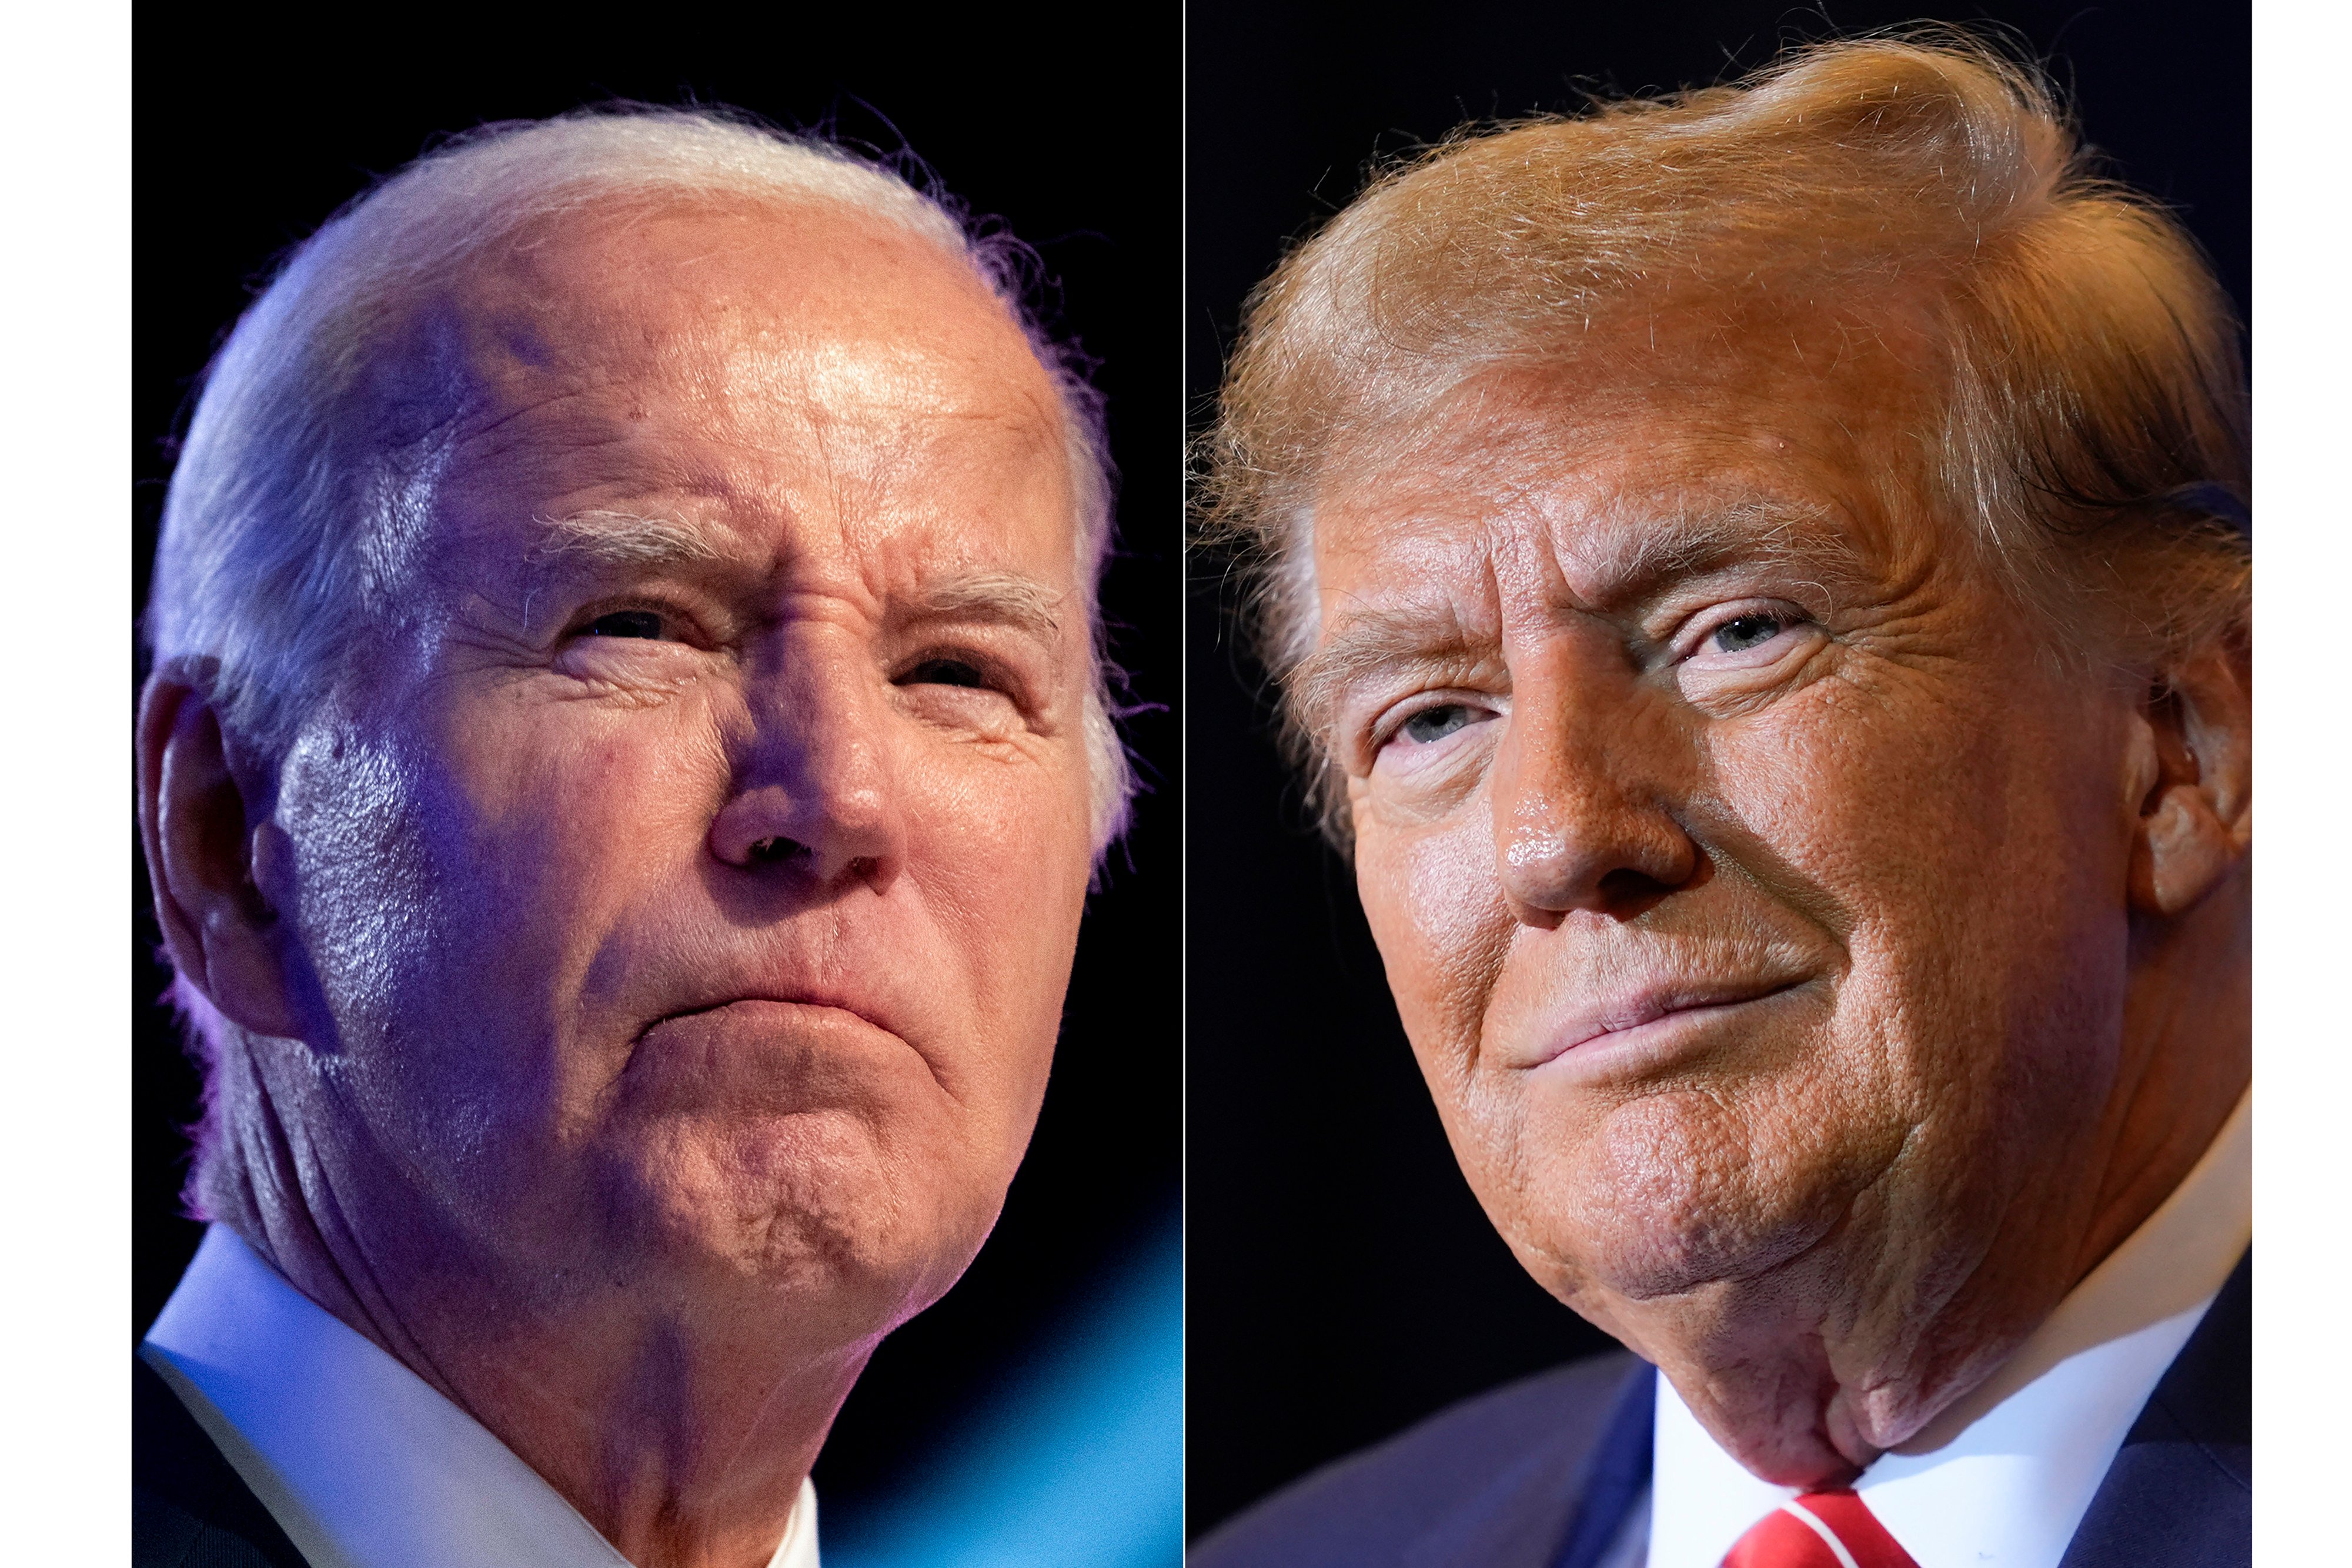 US President Joe Biden, 81, will face off against Donald Trump, 77, in a rematch in November. Photo: AP